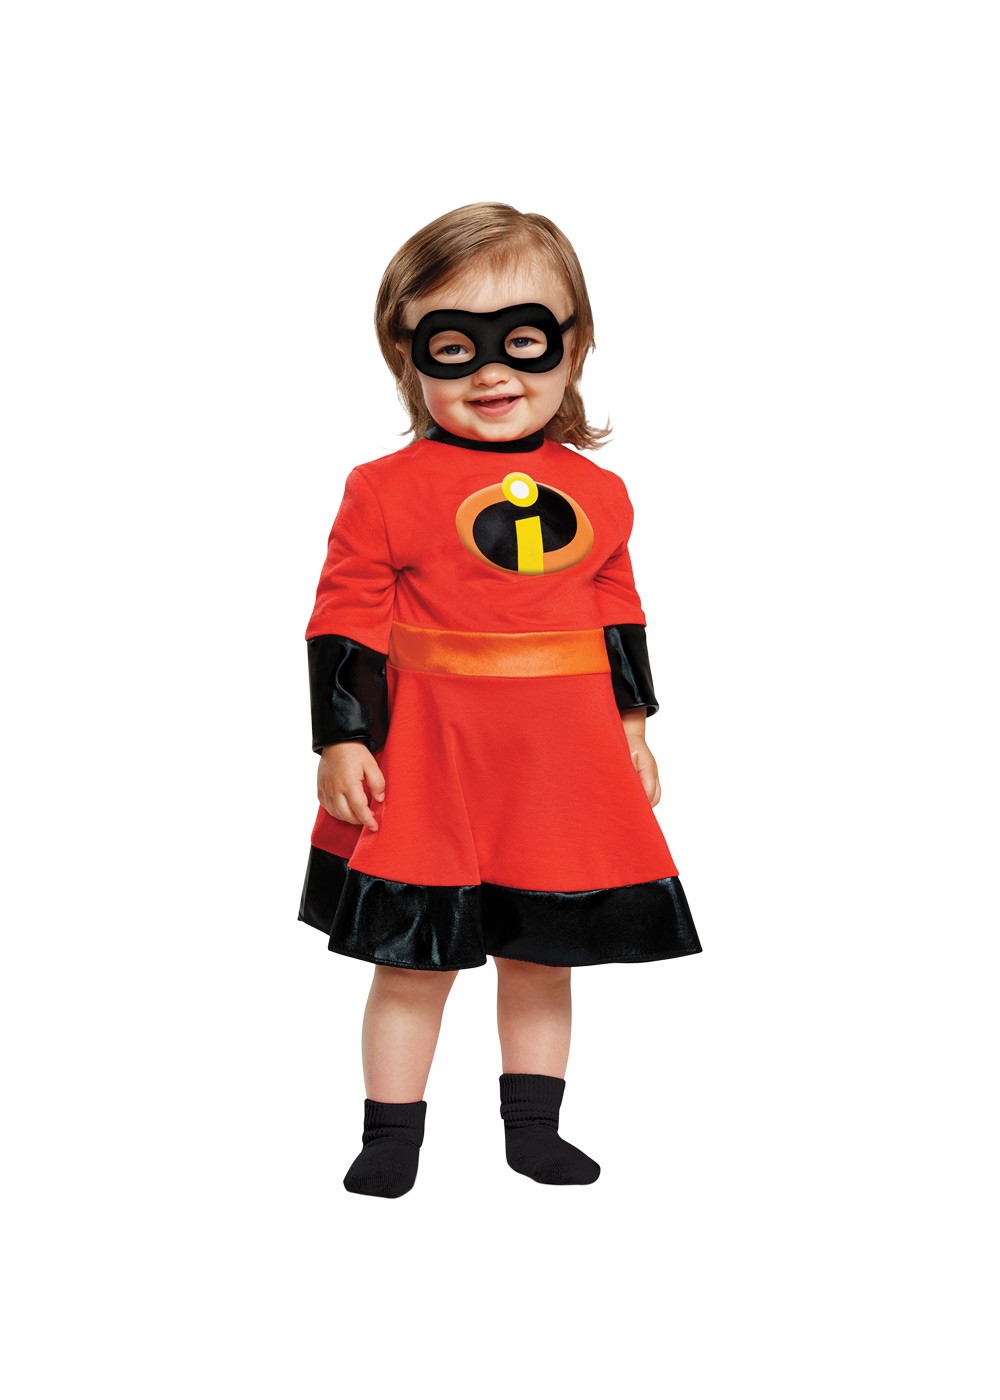 Incredibles Violet Baby Girls Costume